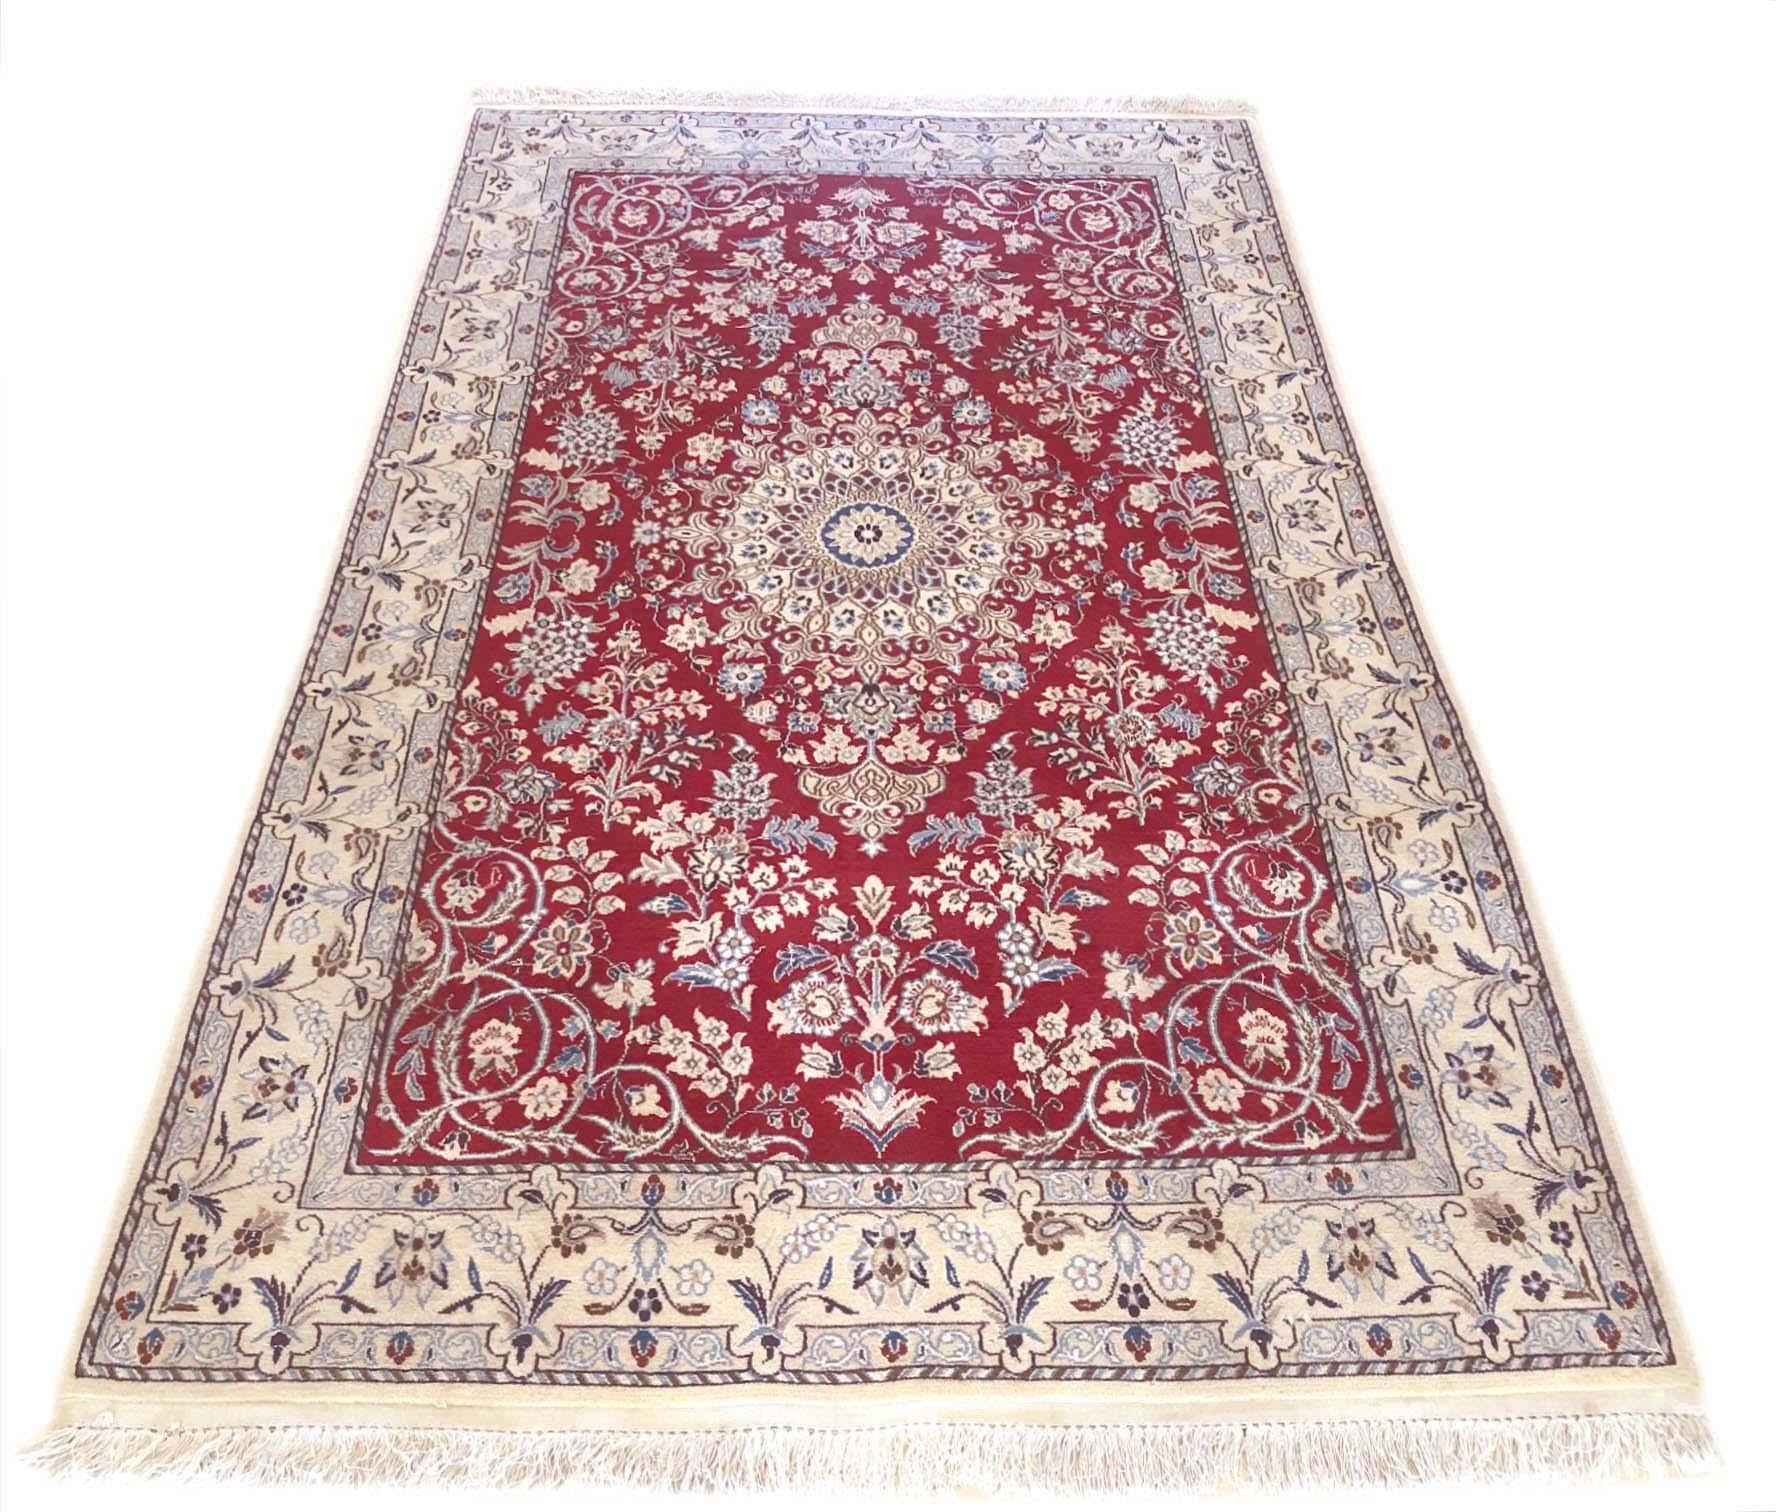 This authentic Persian handmade Nain rug has wool and silk pile (9 LA) with cotton foundation. Nain is a city in Iran that is well known for producing Fine handmade rug. Nain rugs have a high reputation and are very popular. This beautiful rug is